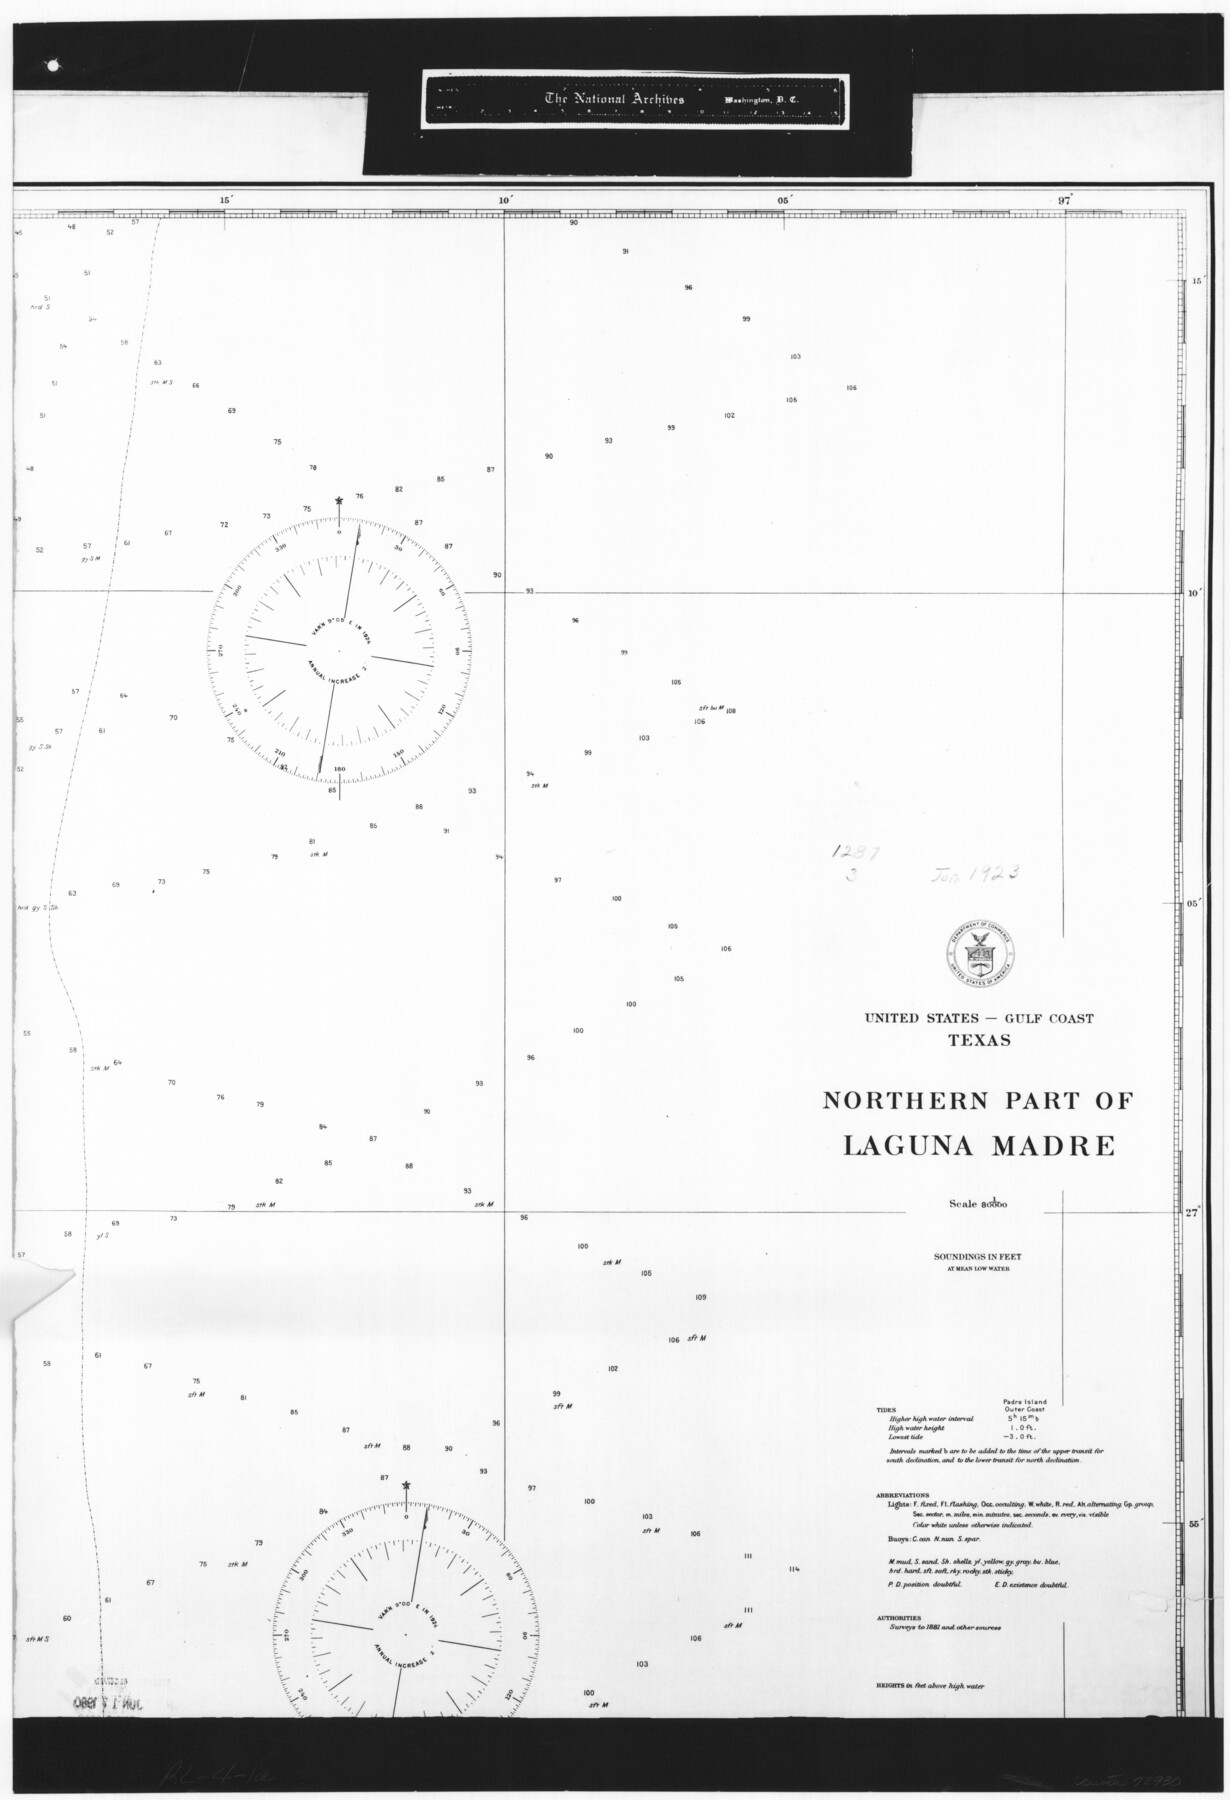 72930, United States - Gulf Coast Texas - Northern part of Laguna Madre, General Map Collection